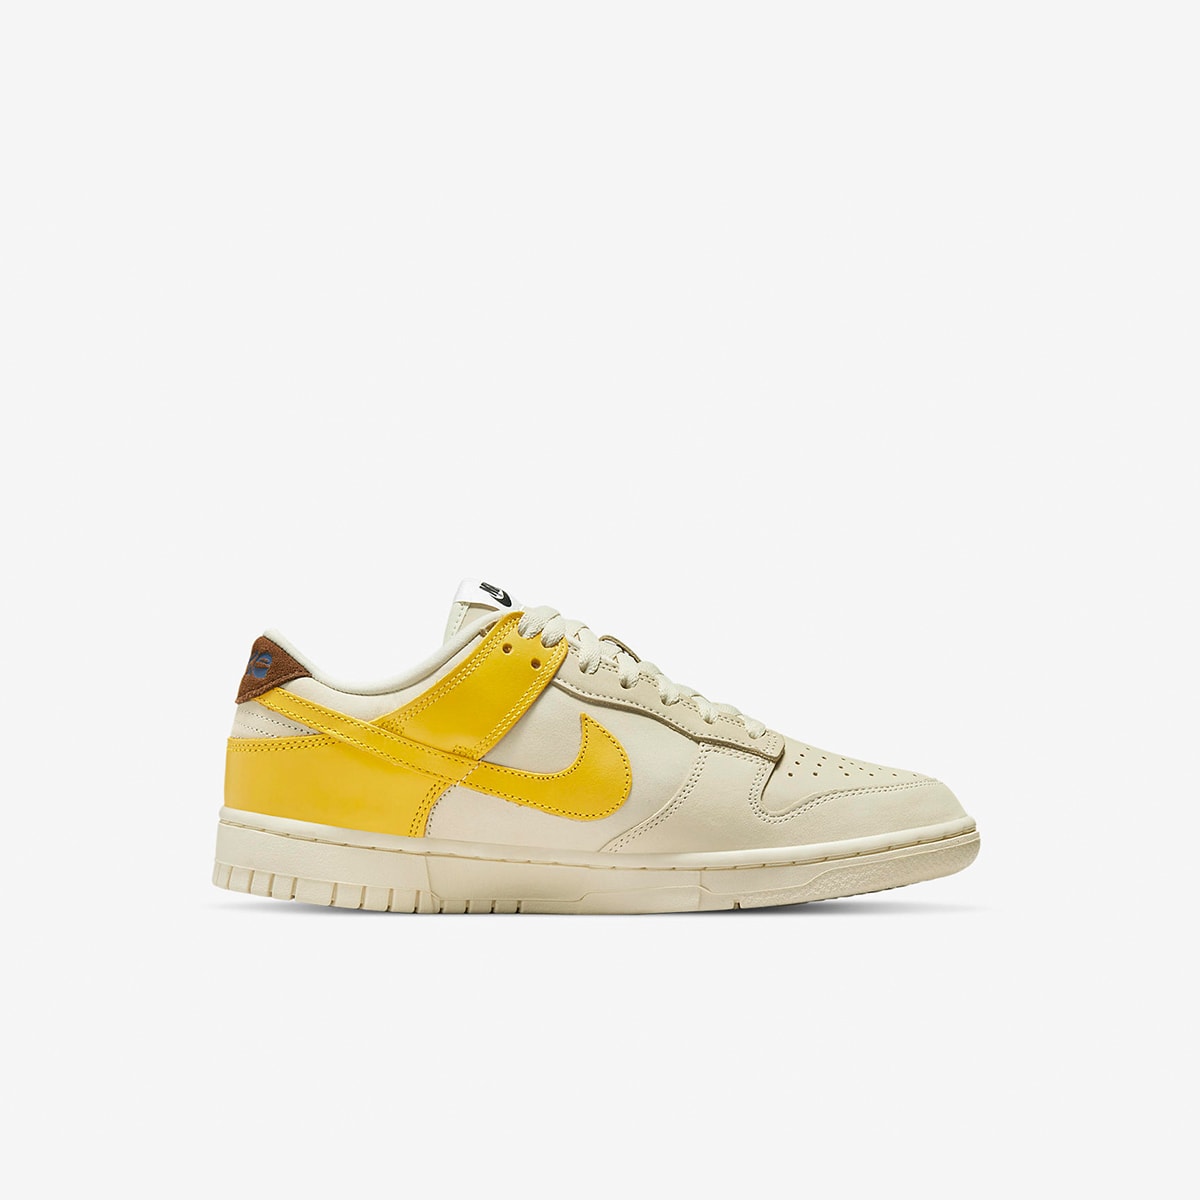 Nike Dunk Low 'Banana' W (Coconut Milk & Sulfur) | END. Launches